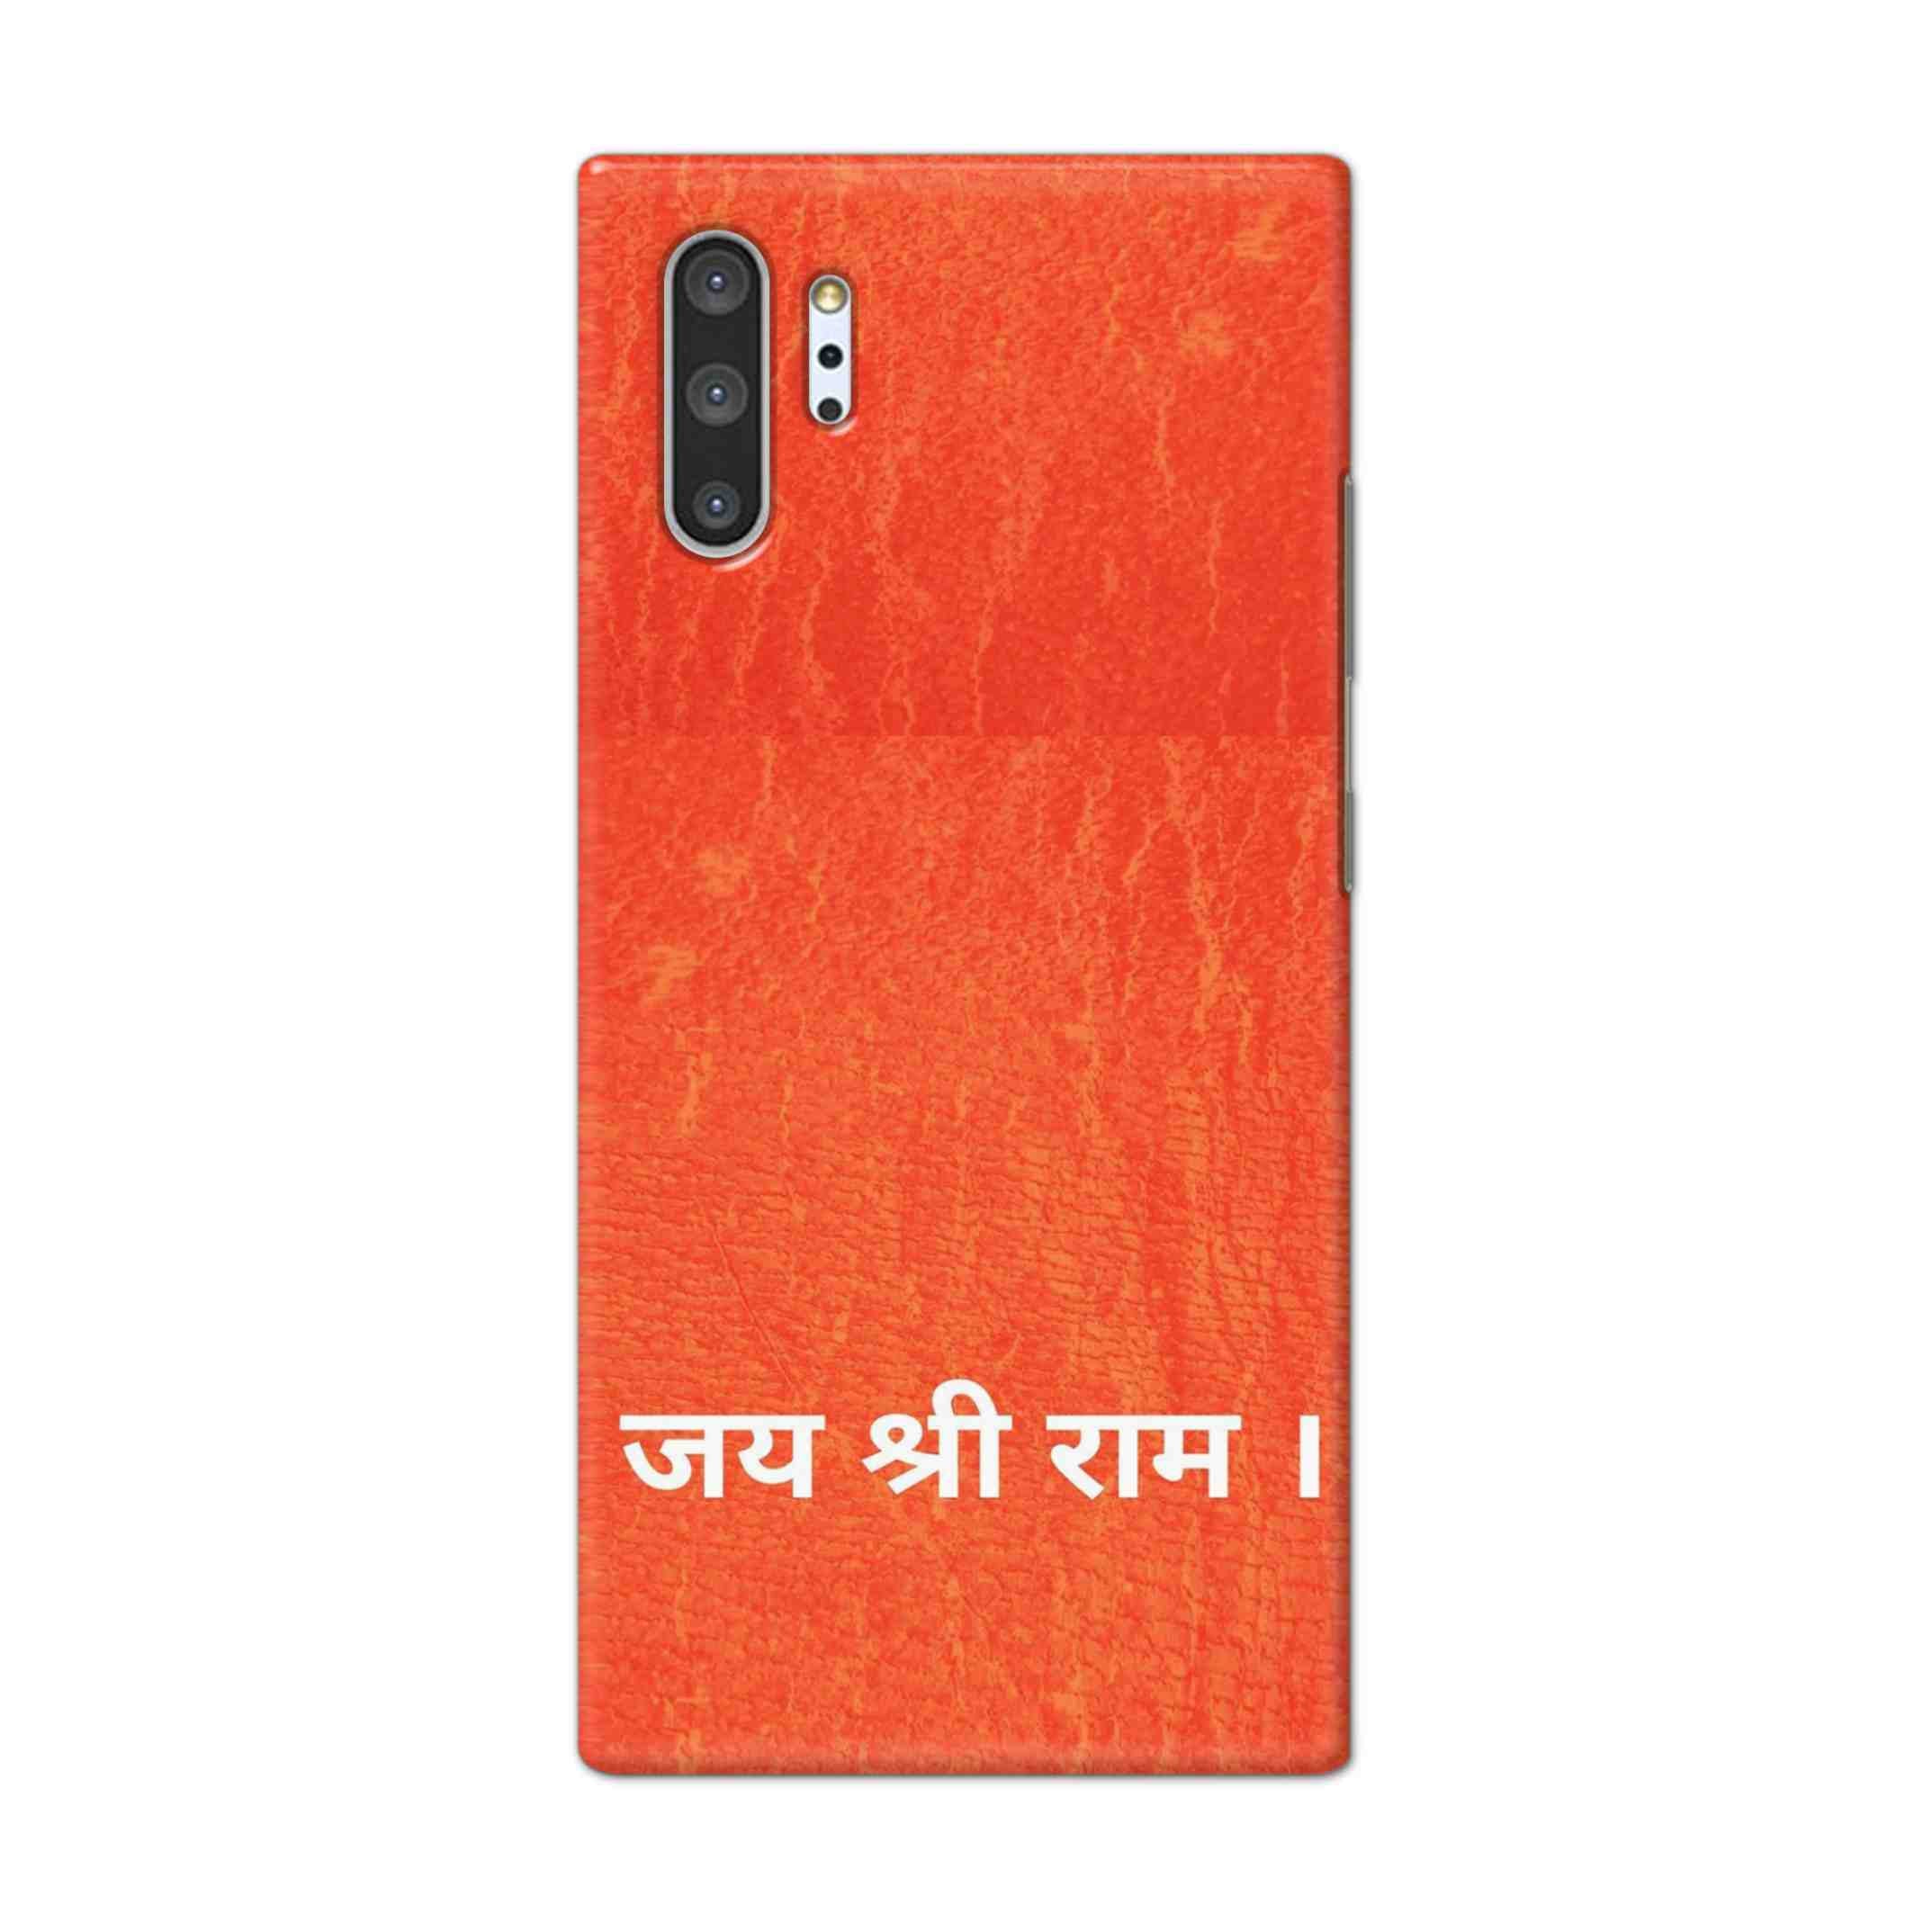 Buy Jai Shree Ram Hard Back Mobile Phone Case Cover For Samsung Galaxy Note 10 Pro Online